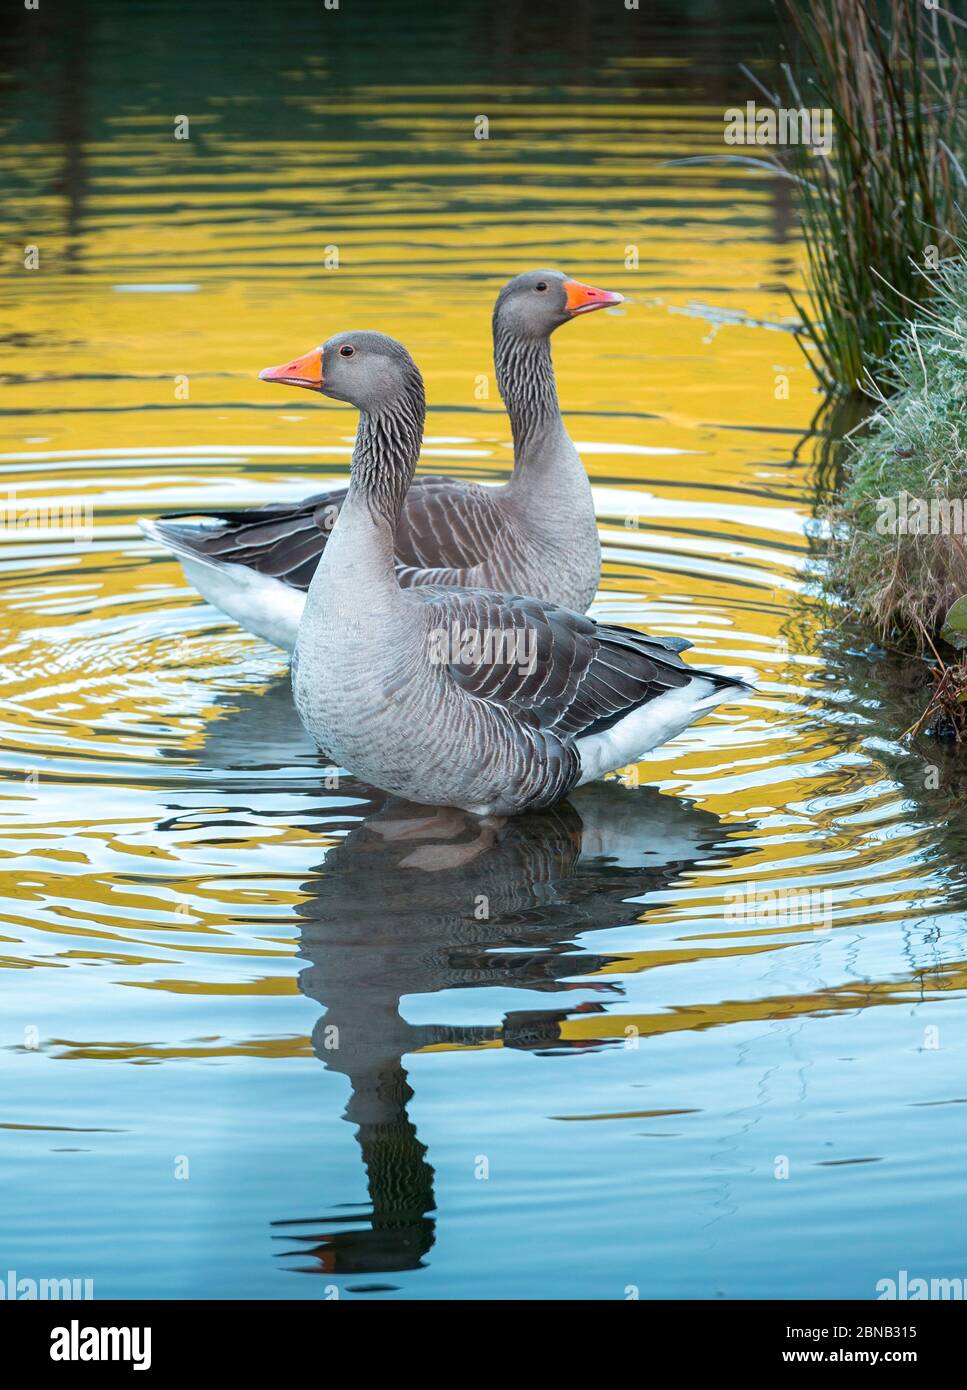 Caffrae, Scottish Borders, UK. 14th May, 2020. UK Weather, wildlife, nature. Image shows greylag geese out for an early morning paddle as the sunlight casts colourful reflections on the water of a pond at Caffrae in the Scottish Borders. The greylag goose is a species of large goose in the waterfowl family Anatidae and the type species of the genus Anser. It has mottled and barred grey and white plumage and an orange beak and pink legs. A large bird, it measures between 74 and 91 centimetres in length, with an average weight of 3.3 kilograms. Credit: phil wilkinson/Alamy Live News Stock Photo